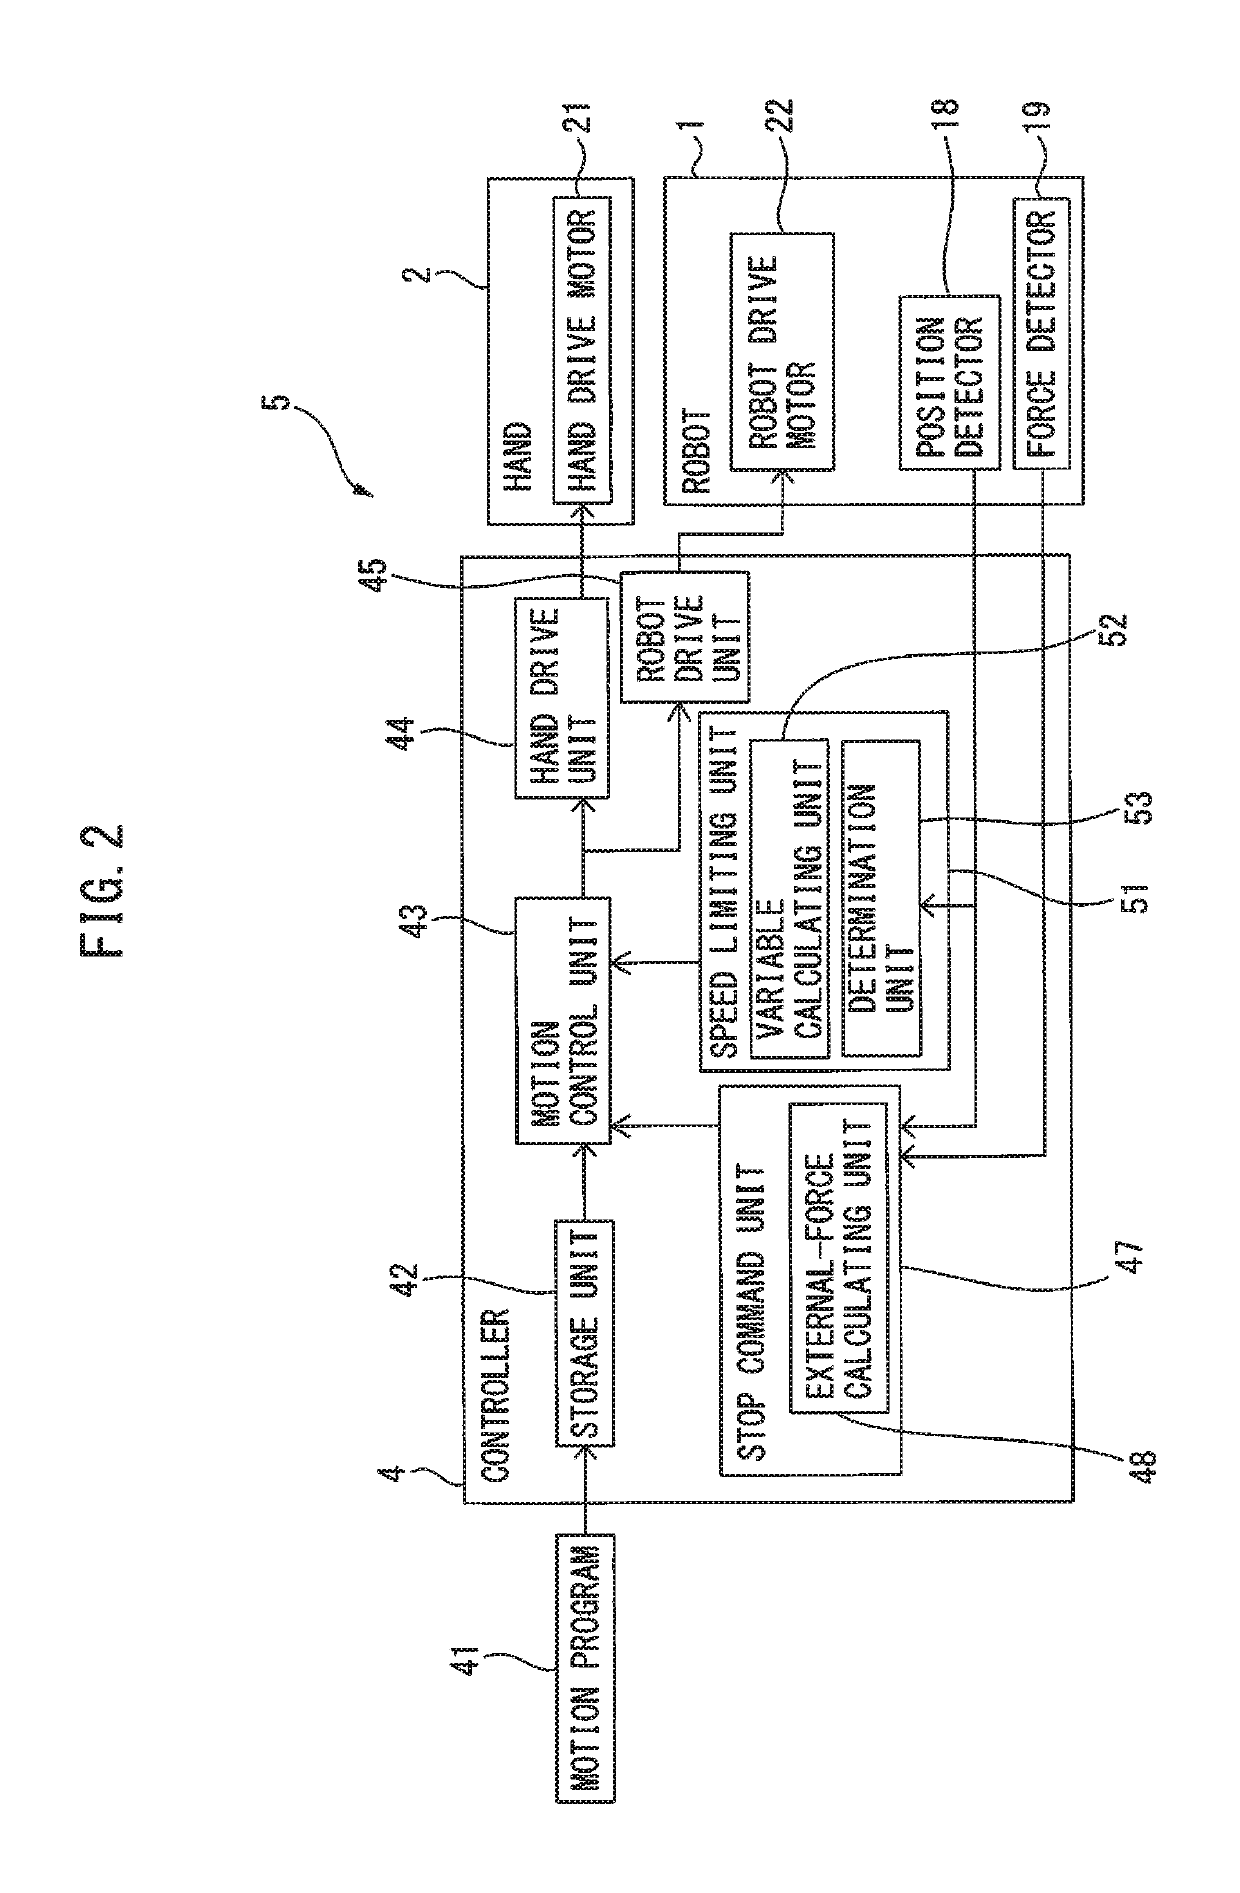 Controller for limiting speed of robot component